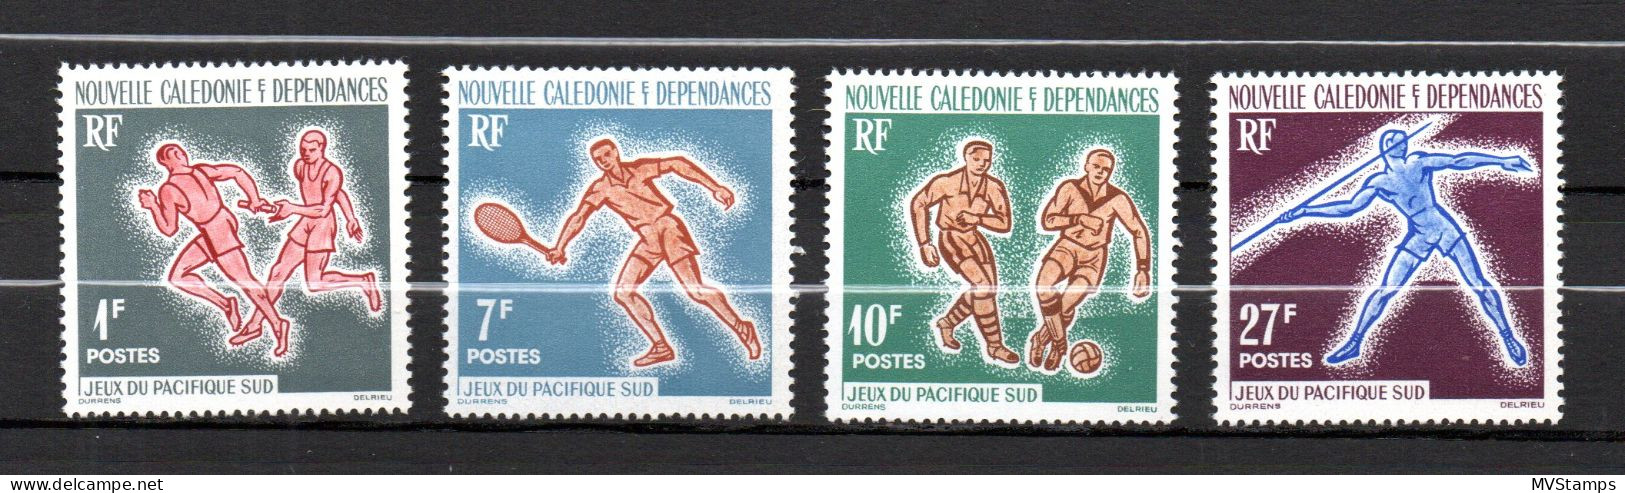 New Caledonia 1963 Old Set Olympic/sports Stamp (Michel 388/91) Nice MNH - Unused Stamps